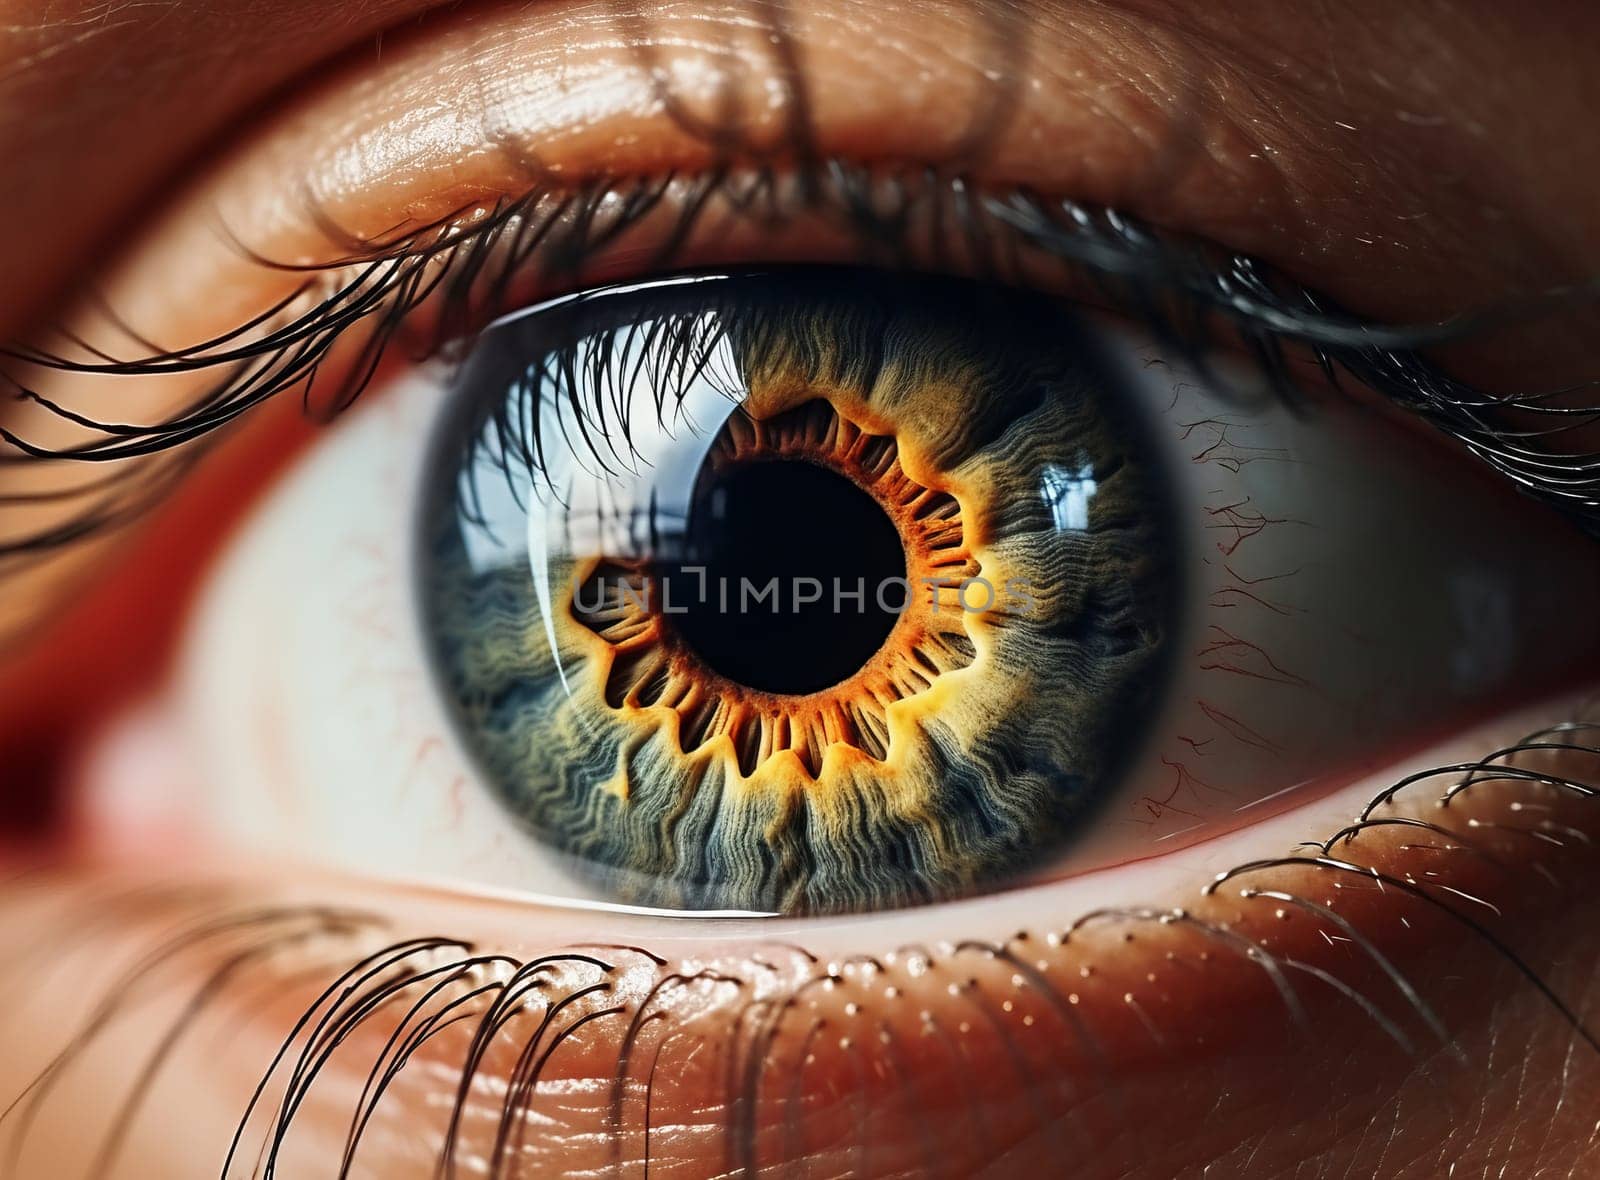 Beautiful human eye looking. Gray eye texture - macro view of pupil retina. Extreme close-up detail of eyeball with amazing reflections. Concept of good vision and problems with eyes